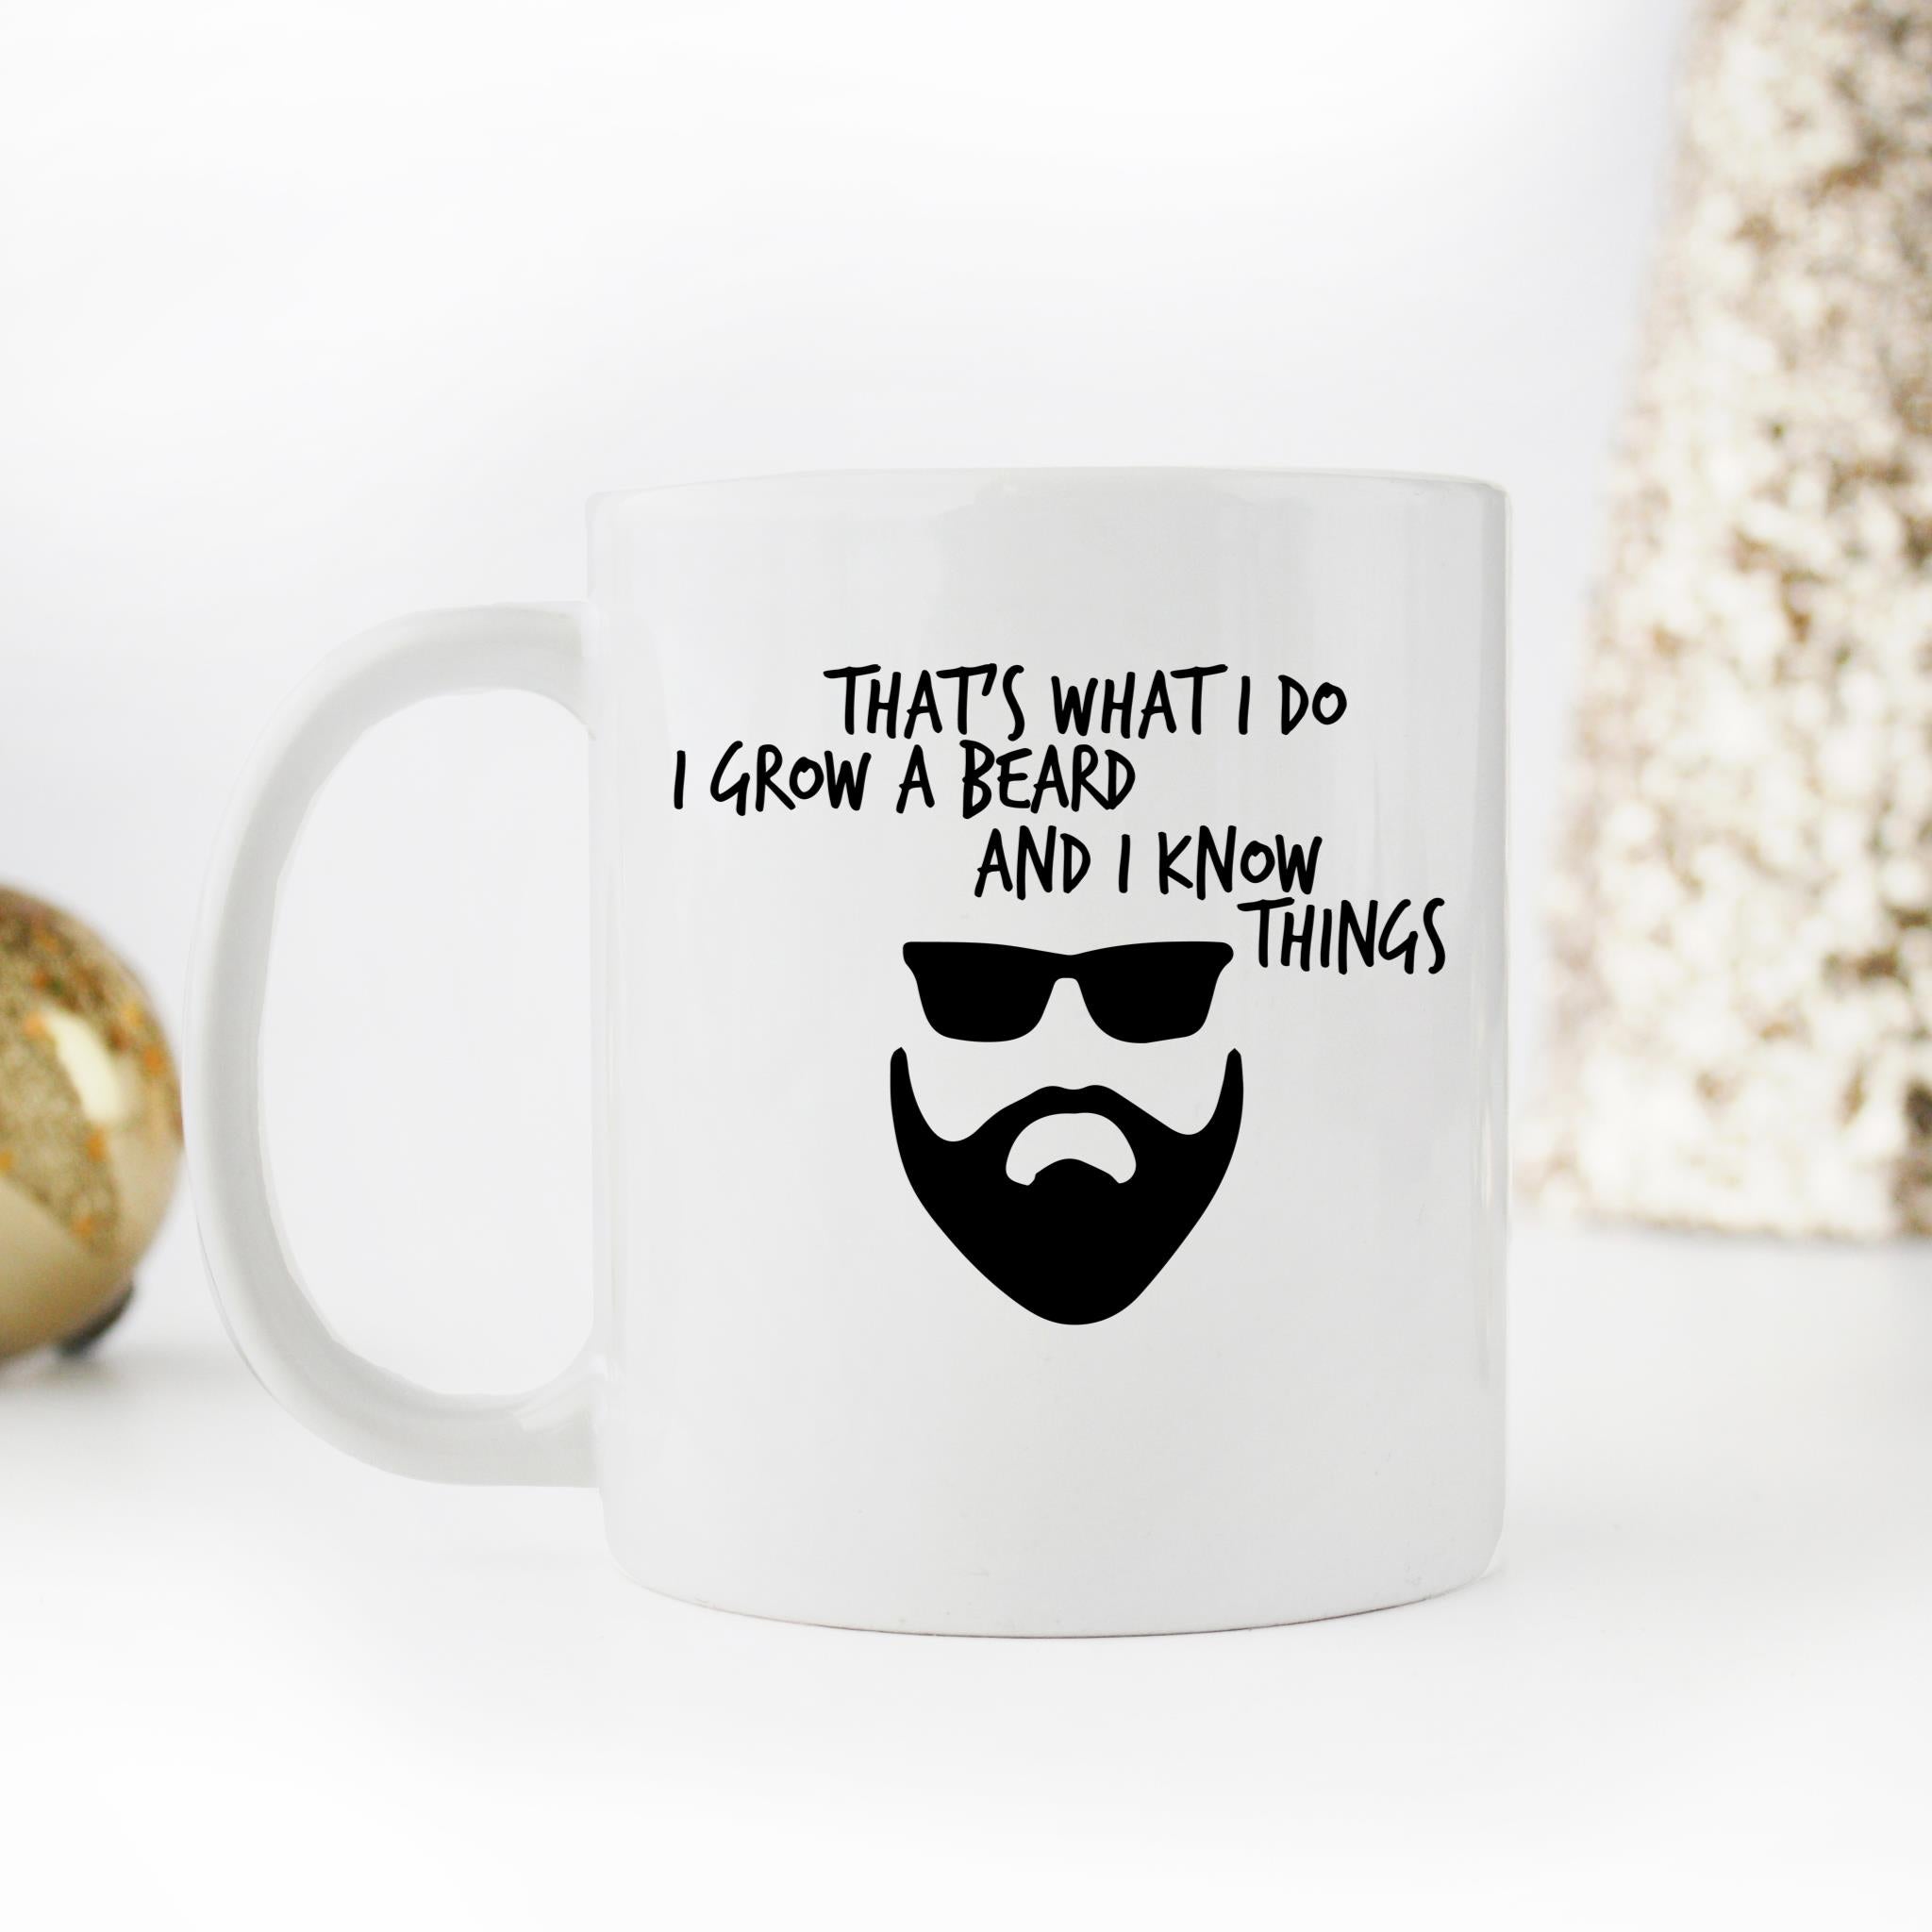 Skitongifts Funny Ceramic Novelty Coffee Mug That's What I Do I Grow A Beard And I Know Things For Grandpa Husband Dad Brother iZGOzWv